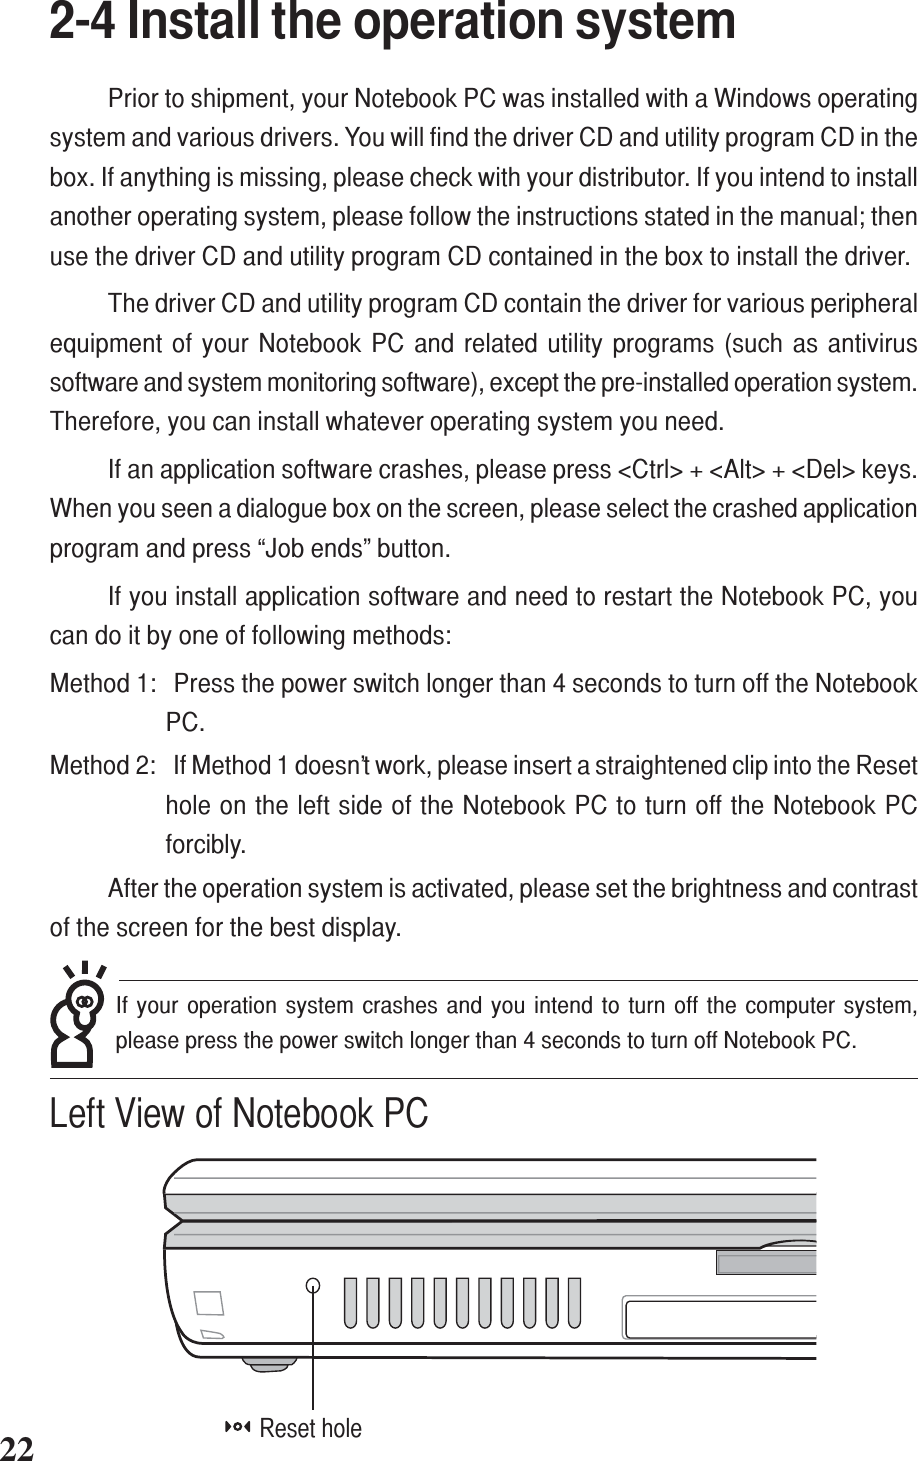 +-+-222-4 Install the operation systemPrior to shipment, your Notebook PC was installed with a Windows operatingsystem and various drivers. You will find the driver CD and utility program CD in thebox. If anything is missing, please check with your distributor. If you intend to installanother operating system, please follow the instructions stated in the manual; thenuse the driver CD and utility program CD contained in the box to install the driver.The driver CD and utility program CD contain the driver for various peripheralequipment of your Notebook PC and related utility programs (such as antivirussoftware and system monitoring software), except the pre-installed operation system.Therefore, you can install whatever operating system you need.If an application software crashes, please press &lt;Ctrl&gt; + &lt;Alt&gt; + &lt;Del&gt; keys.When you seen a dialogue box on the screen, please select the crashed applicationprogram and press “Job ends” button.If you install application software and need to restart the Notebook PC, youcan do it by one of following methods:Method 1: Press the power switch longer than 4 seconds to turn off the NotebookPC.Method 2: If Method 1 doesn’t work, please insert a straightened clip into the Resethole on the left side of the Notebook PC to turn off the Notebook PCforcibly.After the operation system is activated, please set the brightness and contrastof the screen for the best display.Reset holeLeft View of Notebook PCIf your operation system crashes and you intend to turn off the computer system,please press the power switch longer than 4 seconds to turn off Notebook PC.